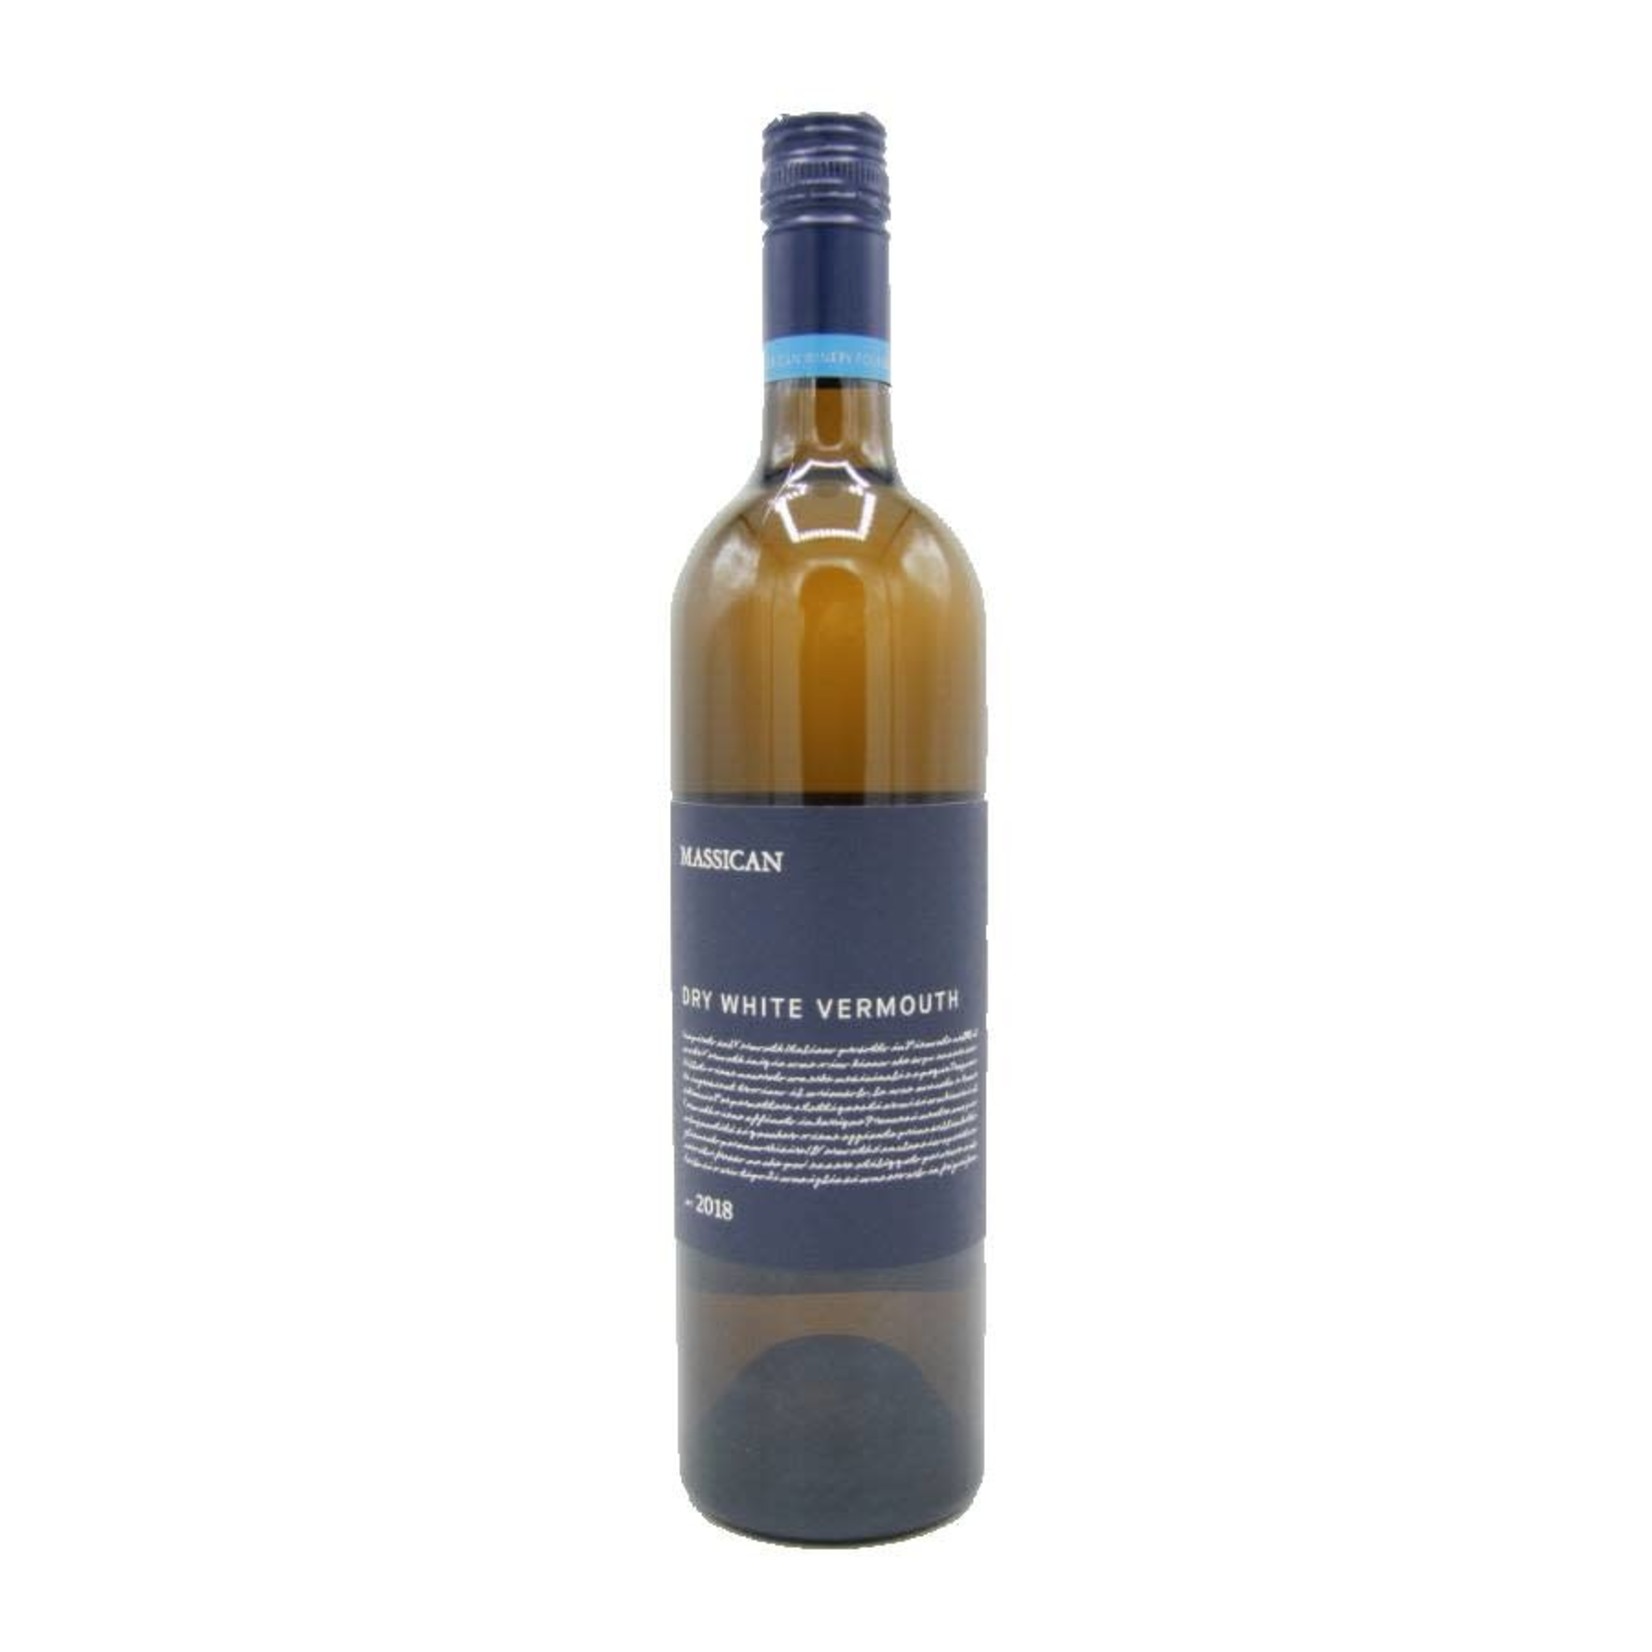 2018 Massican Dry White Vermouth